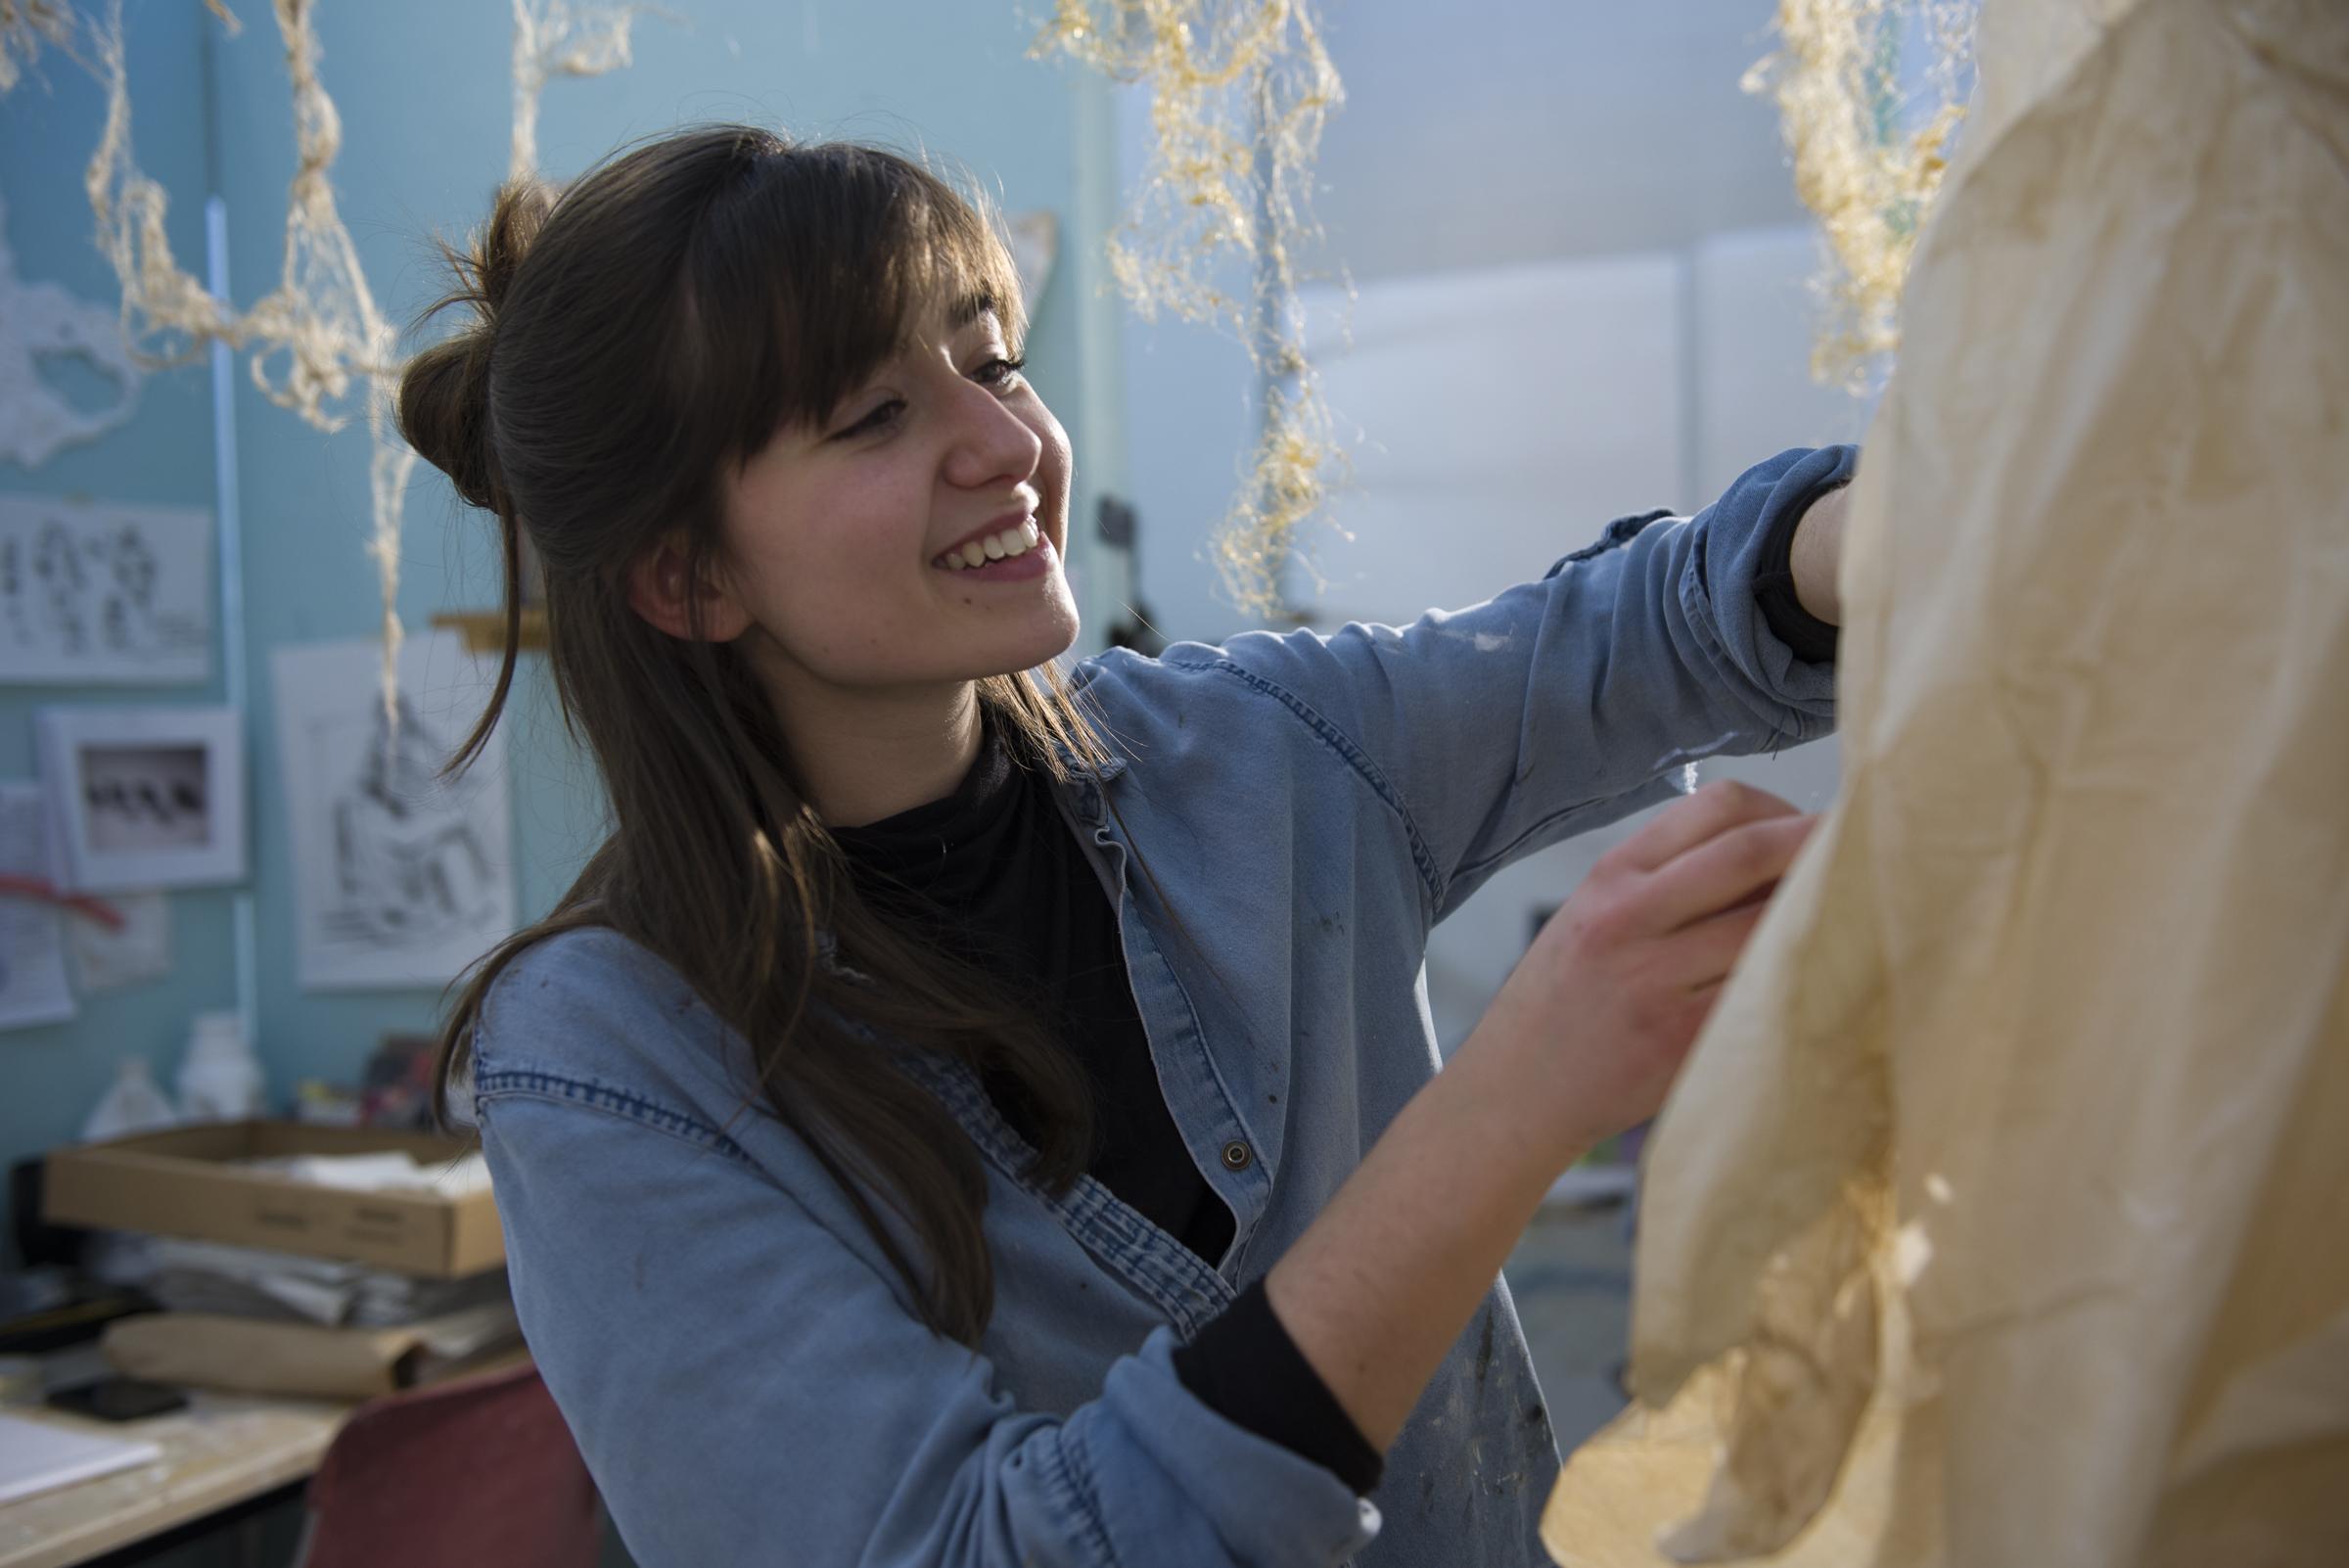 Isabella Saracena, SFA '19, is researching forgotten women artists from the past and recognizing their contribution through her own original works. (Tiffany Taylor/UConn Photo)